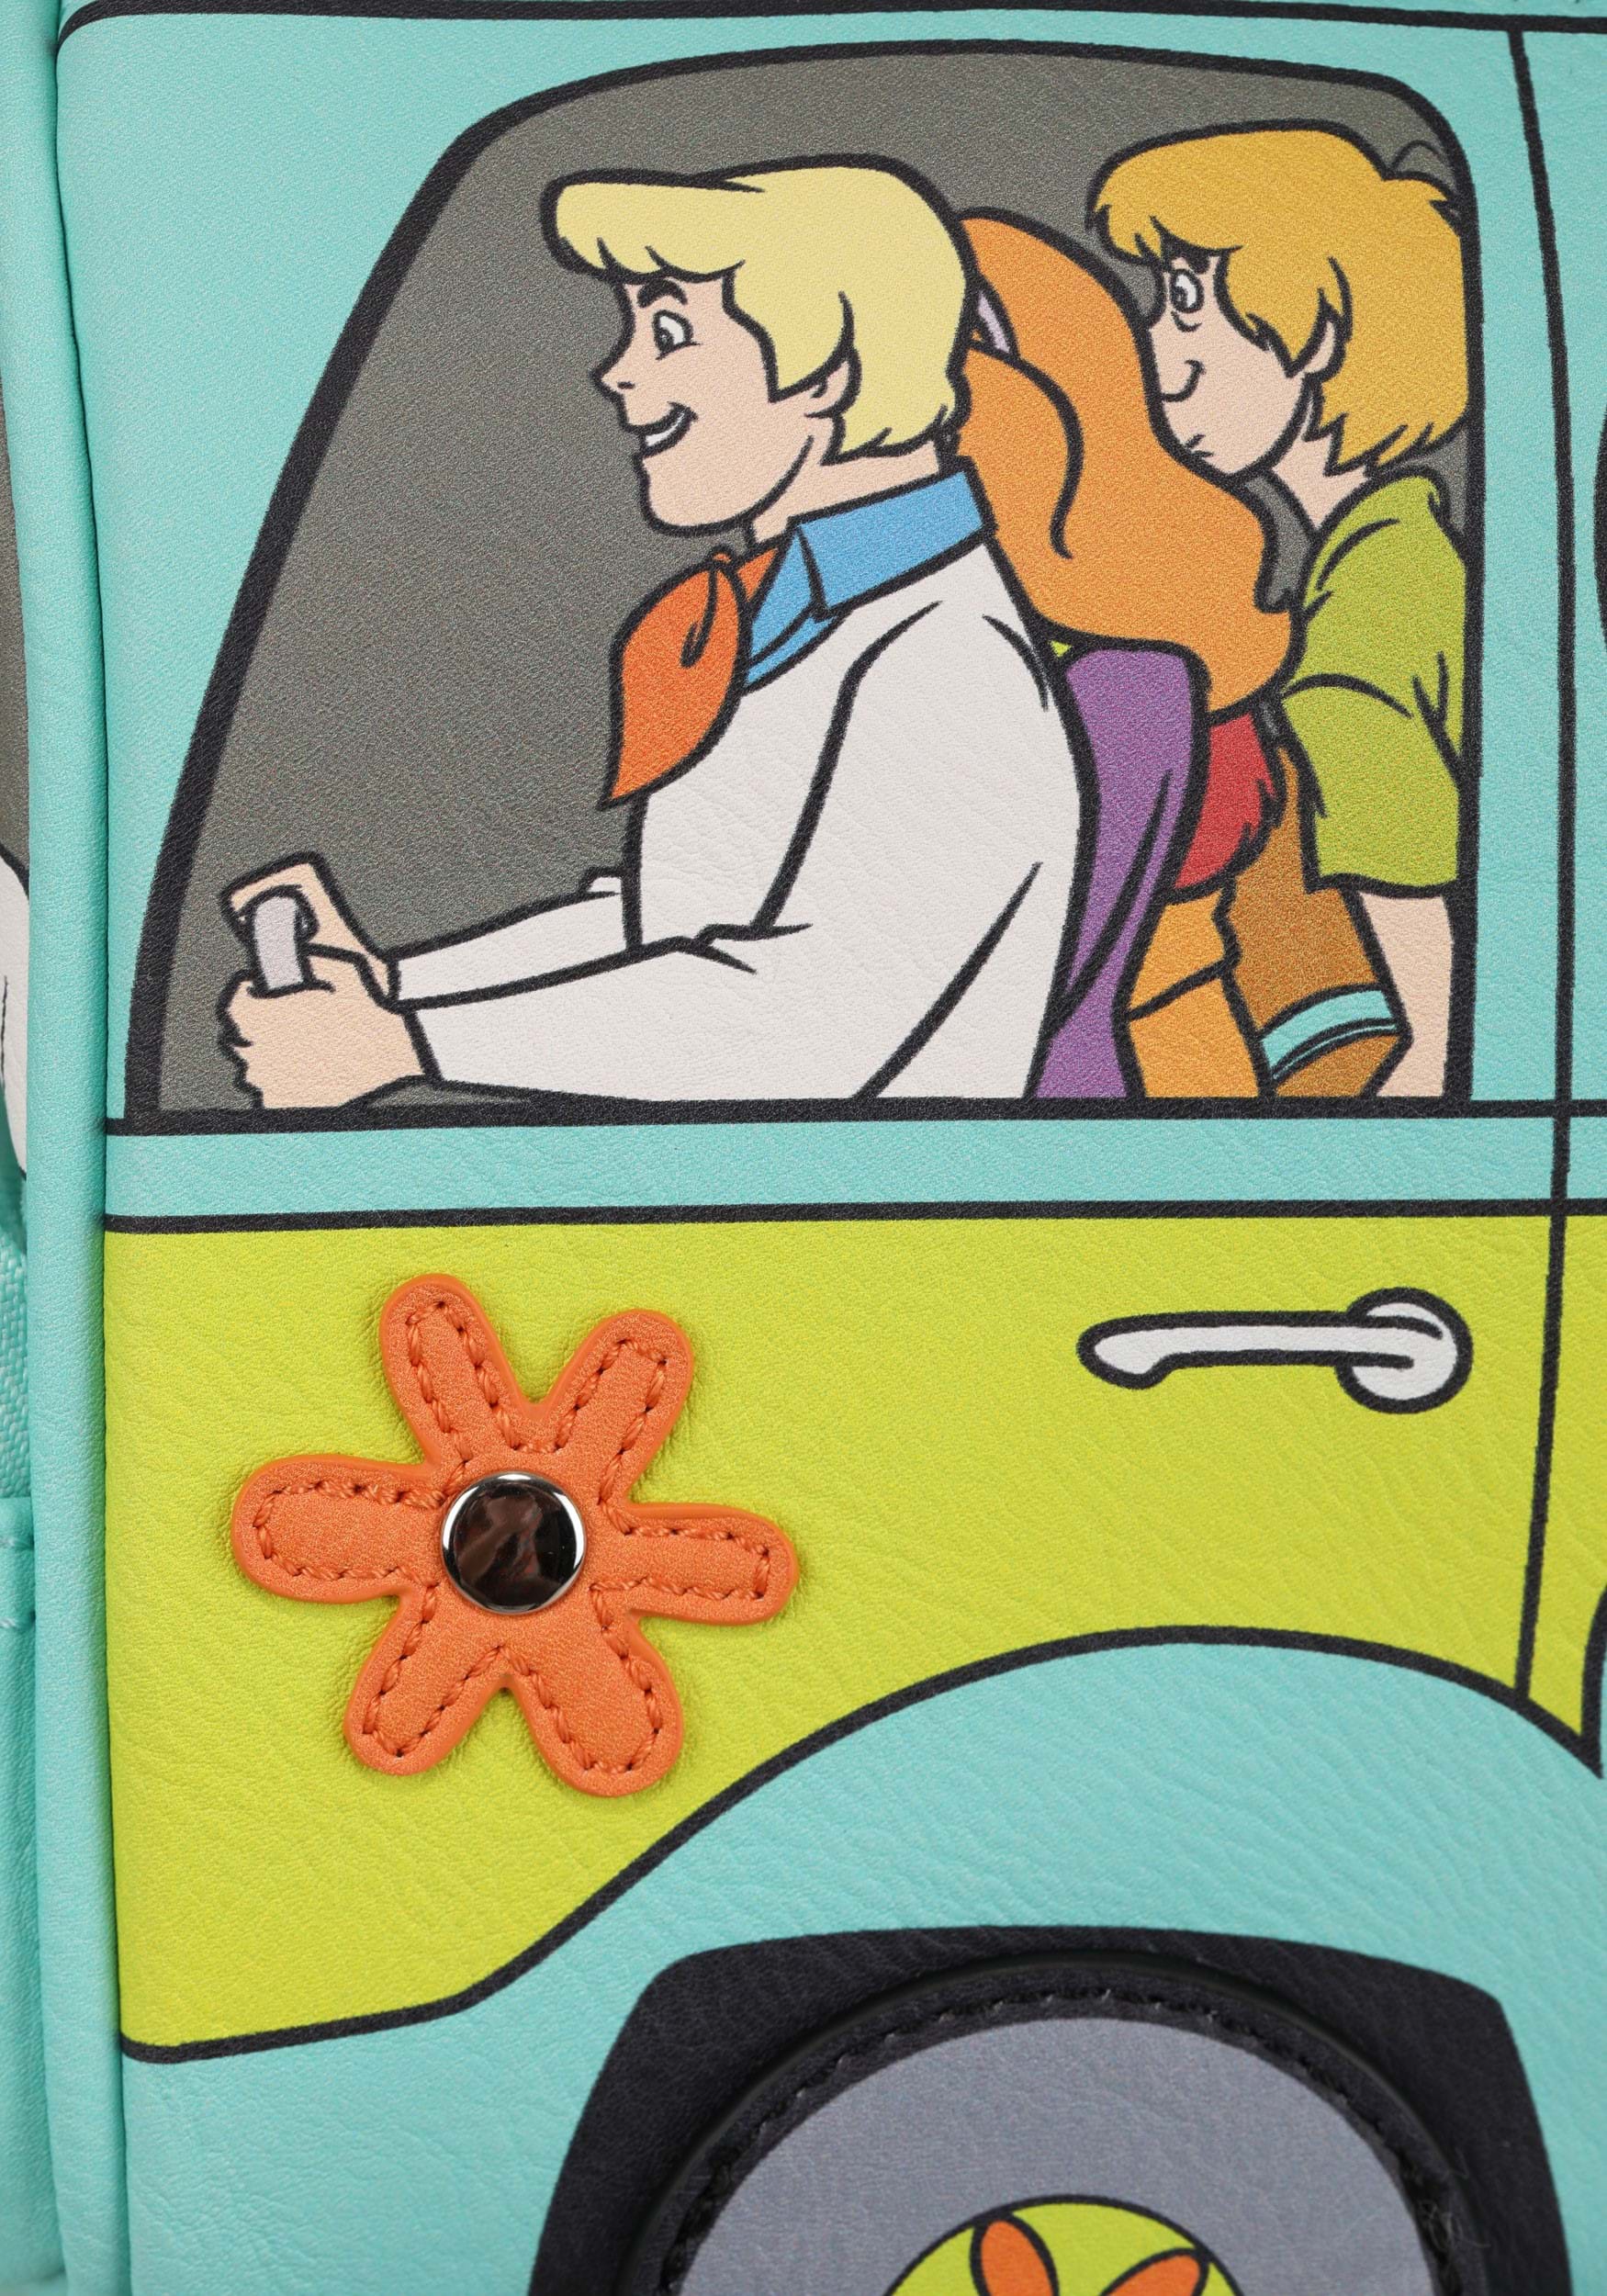 Lunchbox Dad: How to Make a Scooby-Doo Mystery Machine School Lunch